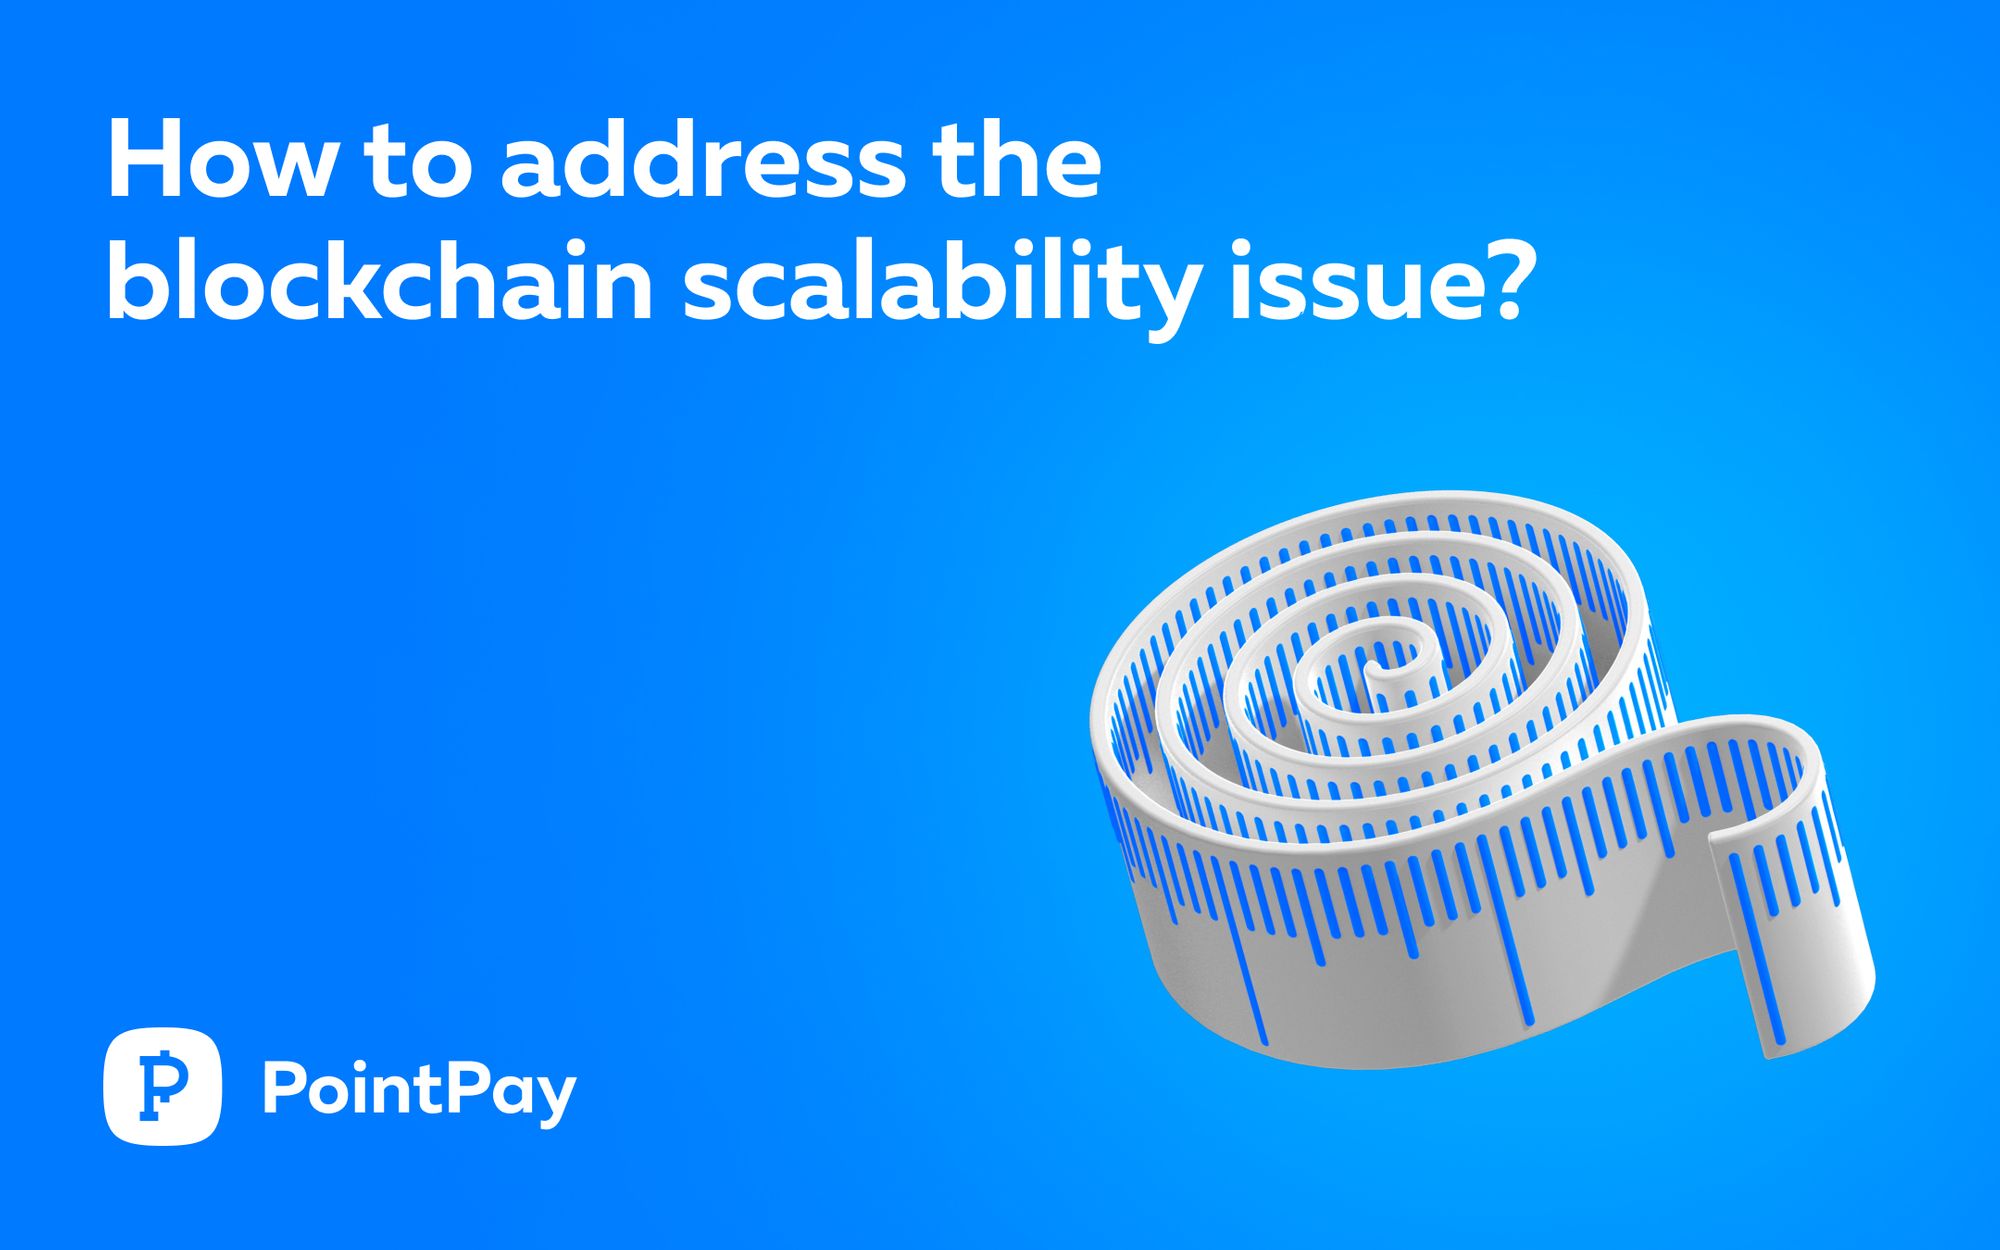 How to address the blockchain scalability issue?